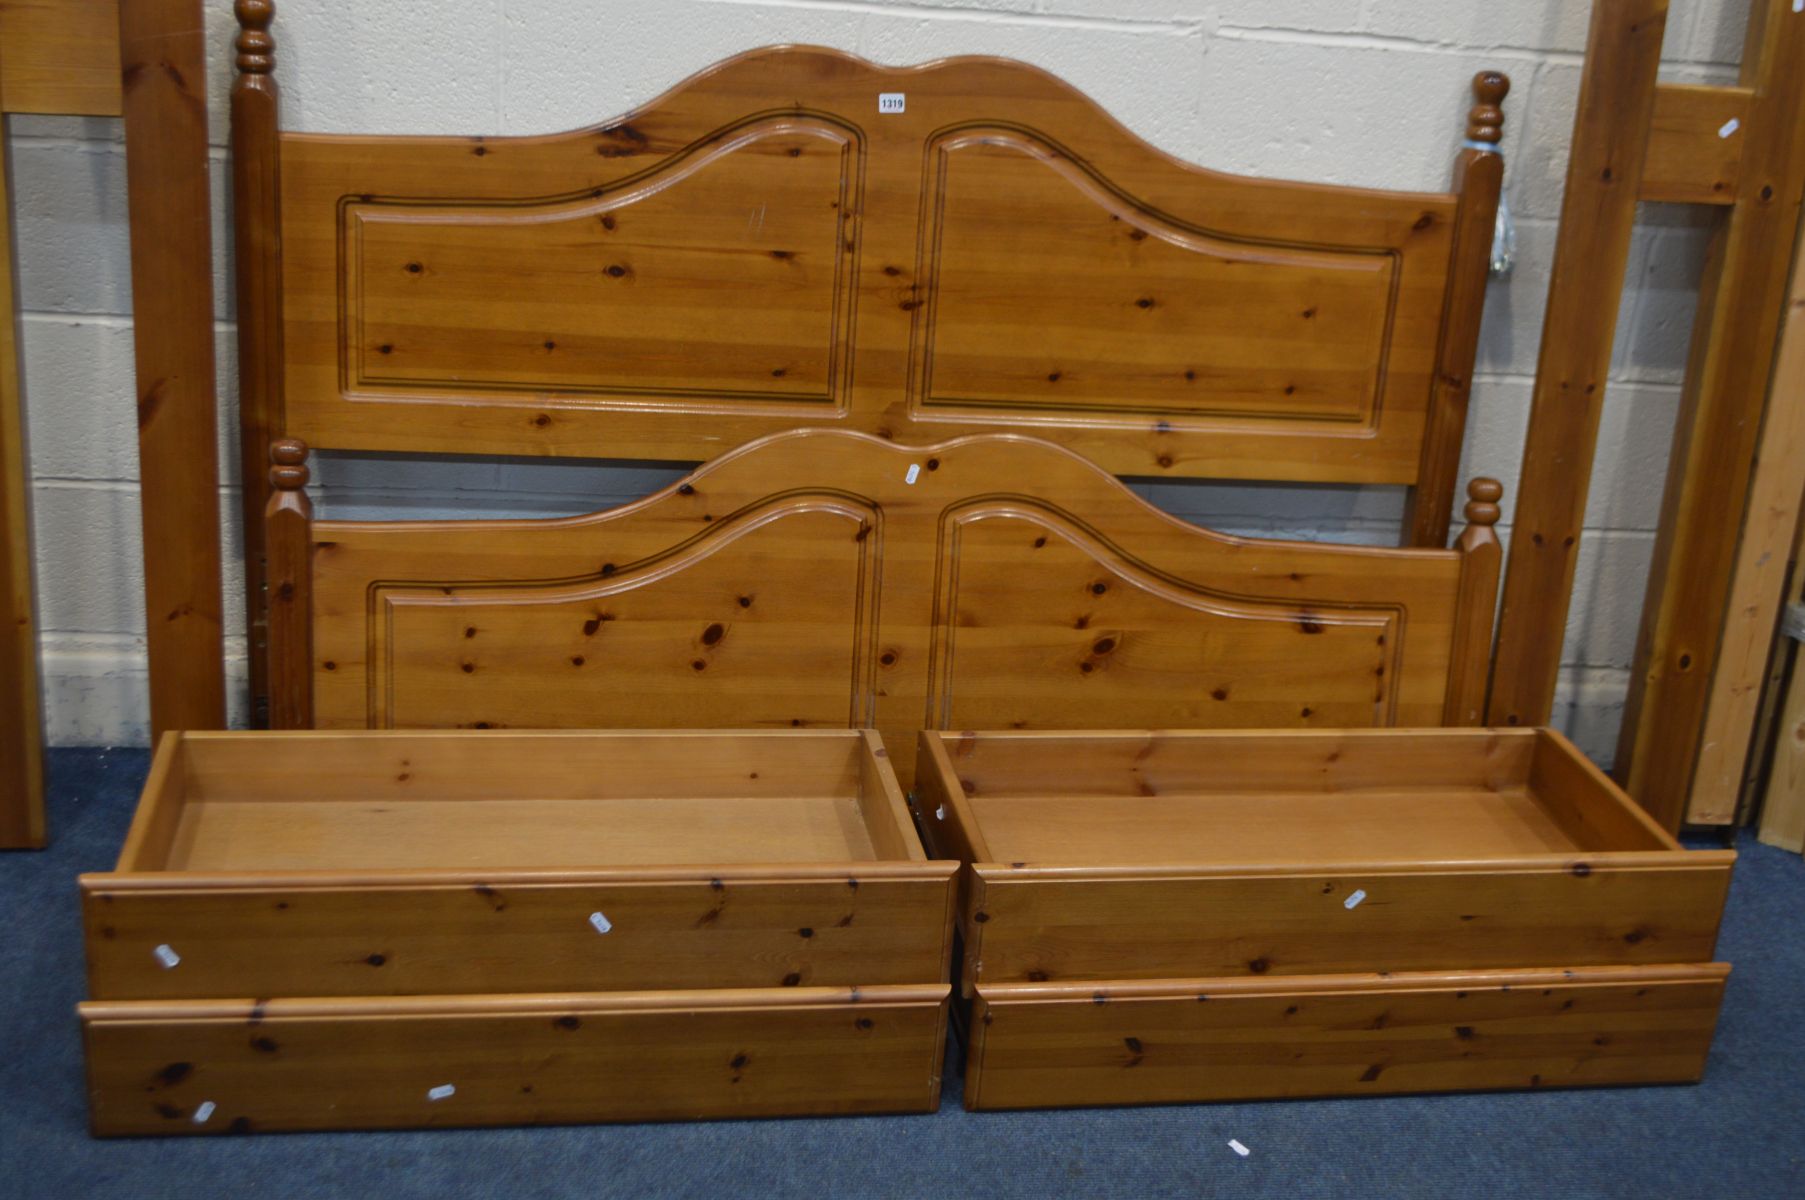 A PINE 5FT BEDSTEAD with side rails containing two drawers each, slats and bolts - Image 2 of 2